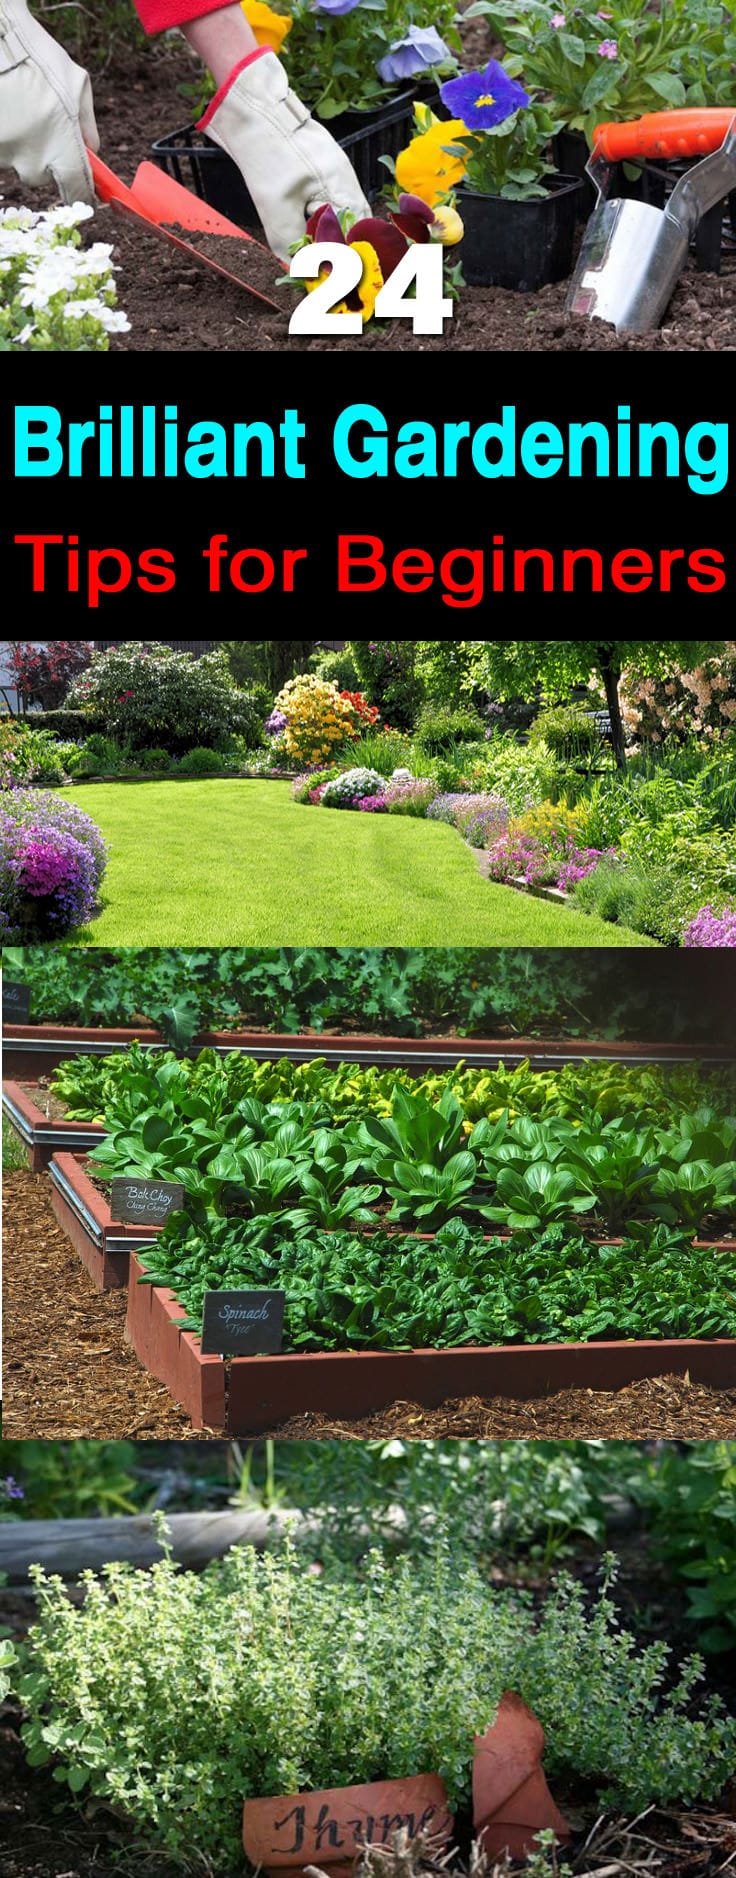 If you started gardening recently and tag yourself as a beginner then these '24 Gardening Tips for Beginners' are useful for you.